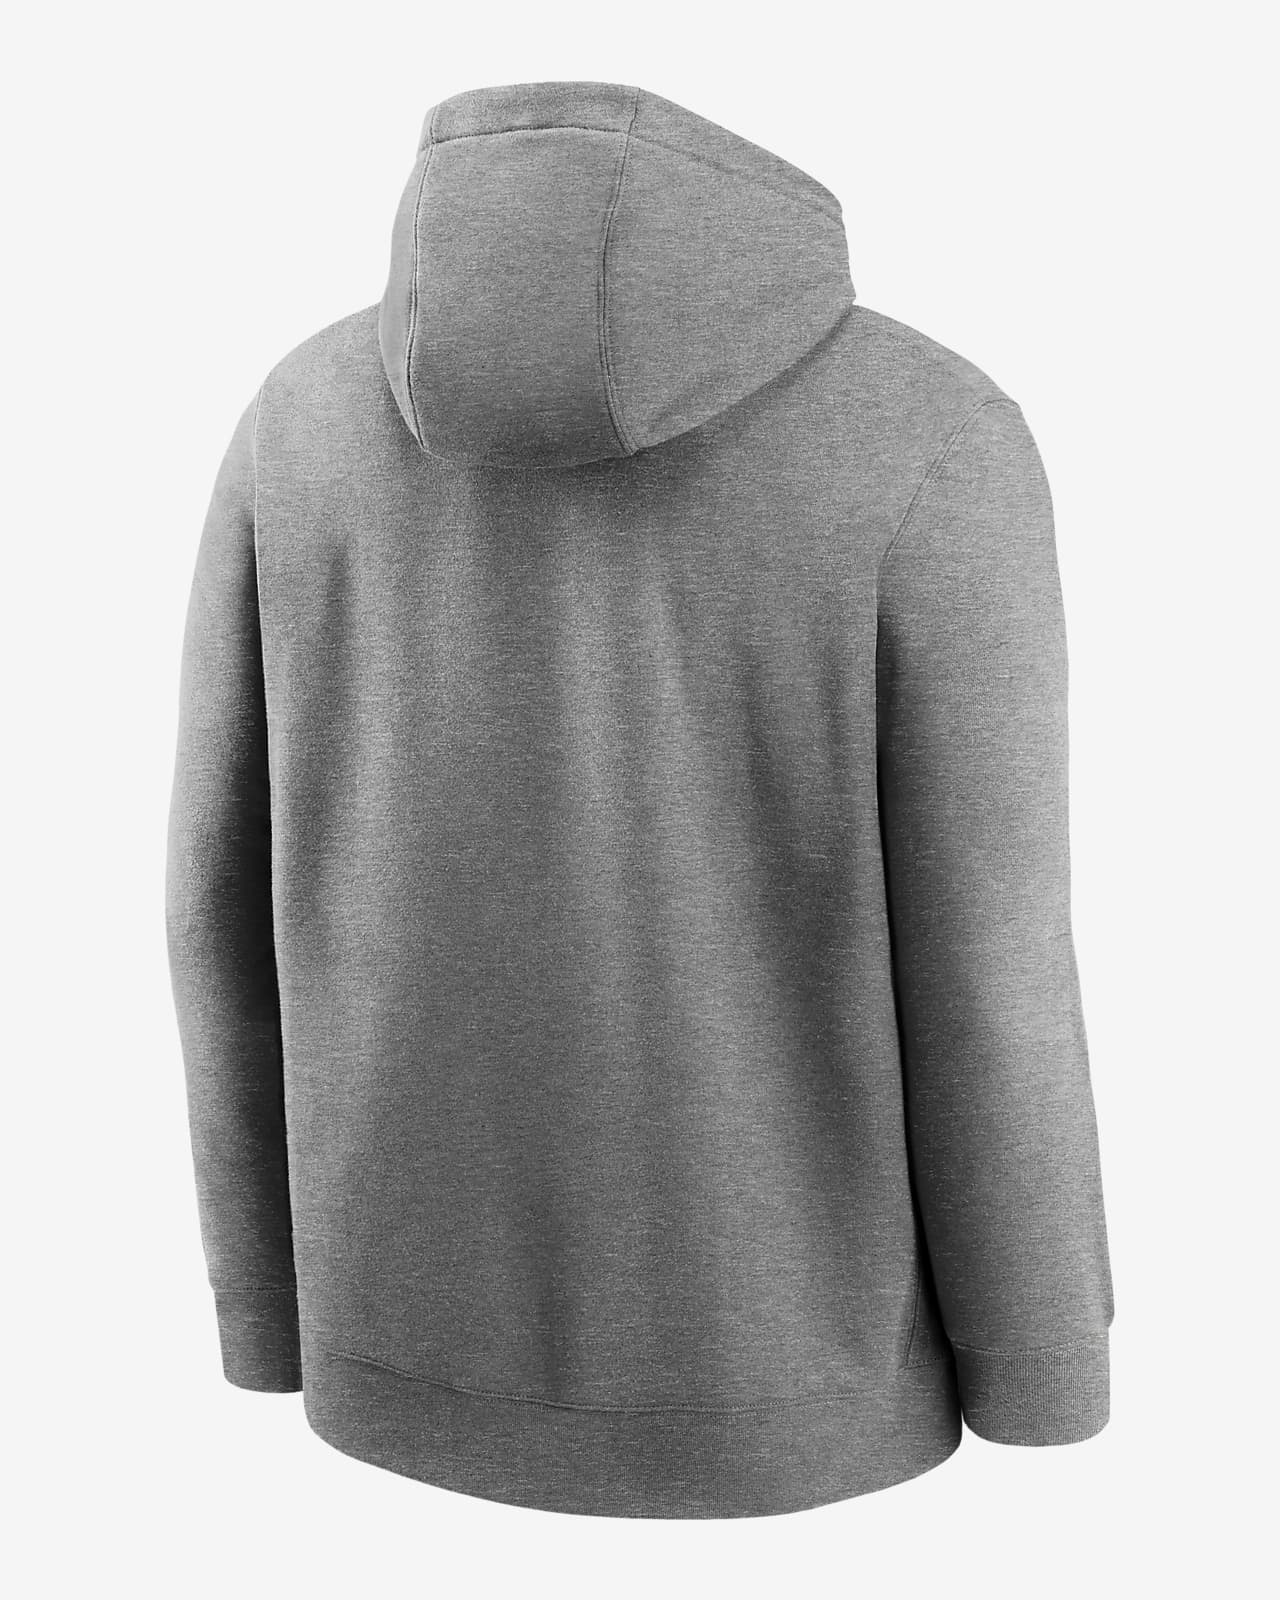 miami dolphins hoodie grey